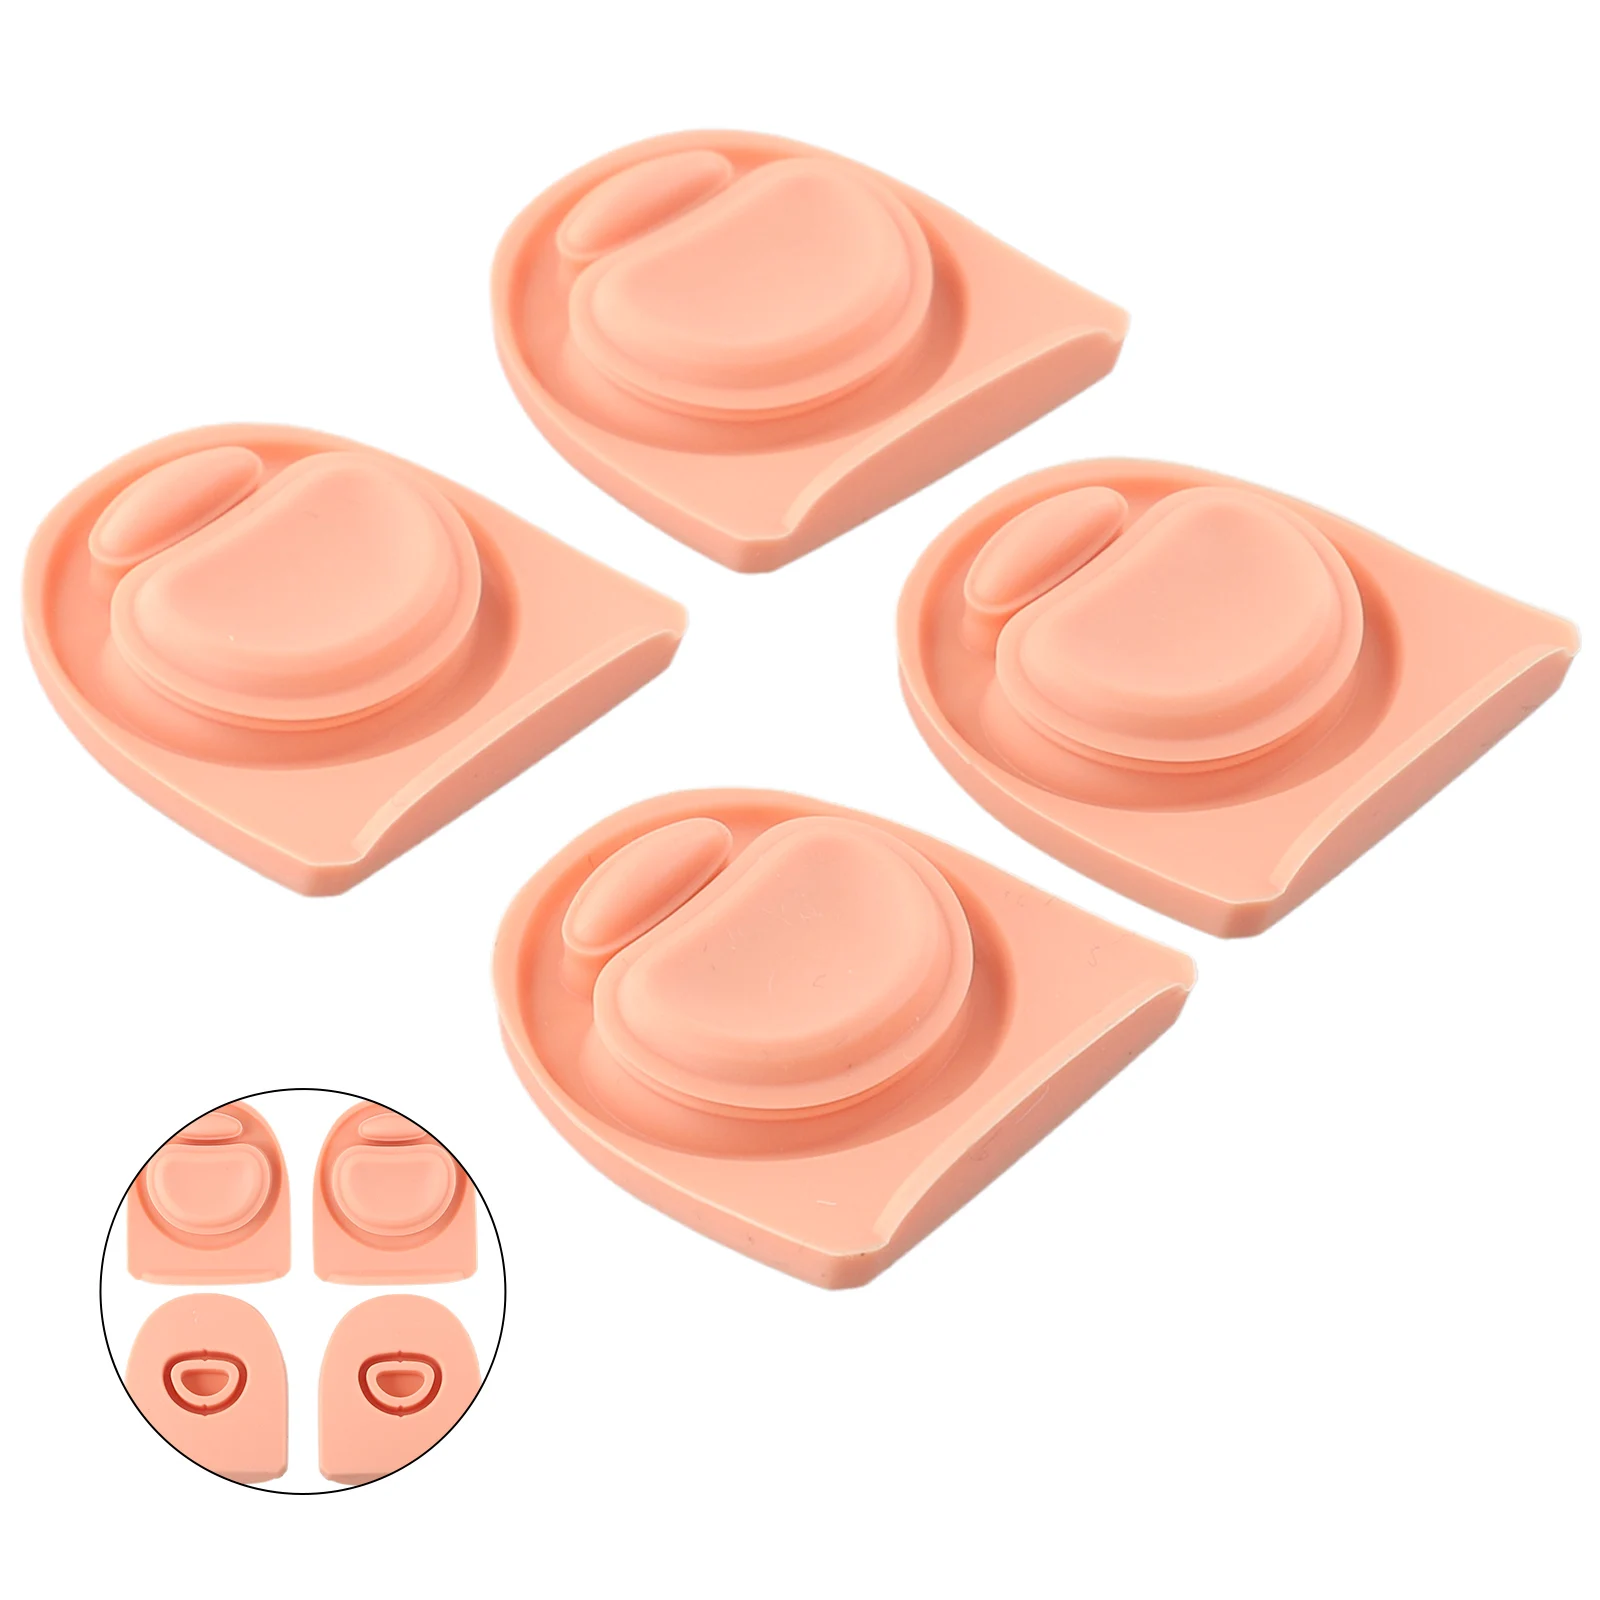 2pcs Replacement Stopper Compatible with Owala FreeSip 24oz 32oz, Water  Bottle Top Lid for Owala 19/24/32/40oz Seal Bottle Cap Leak Proof Silicone